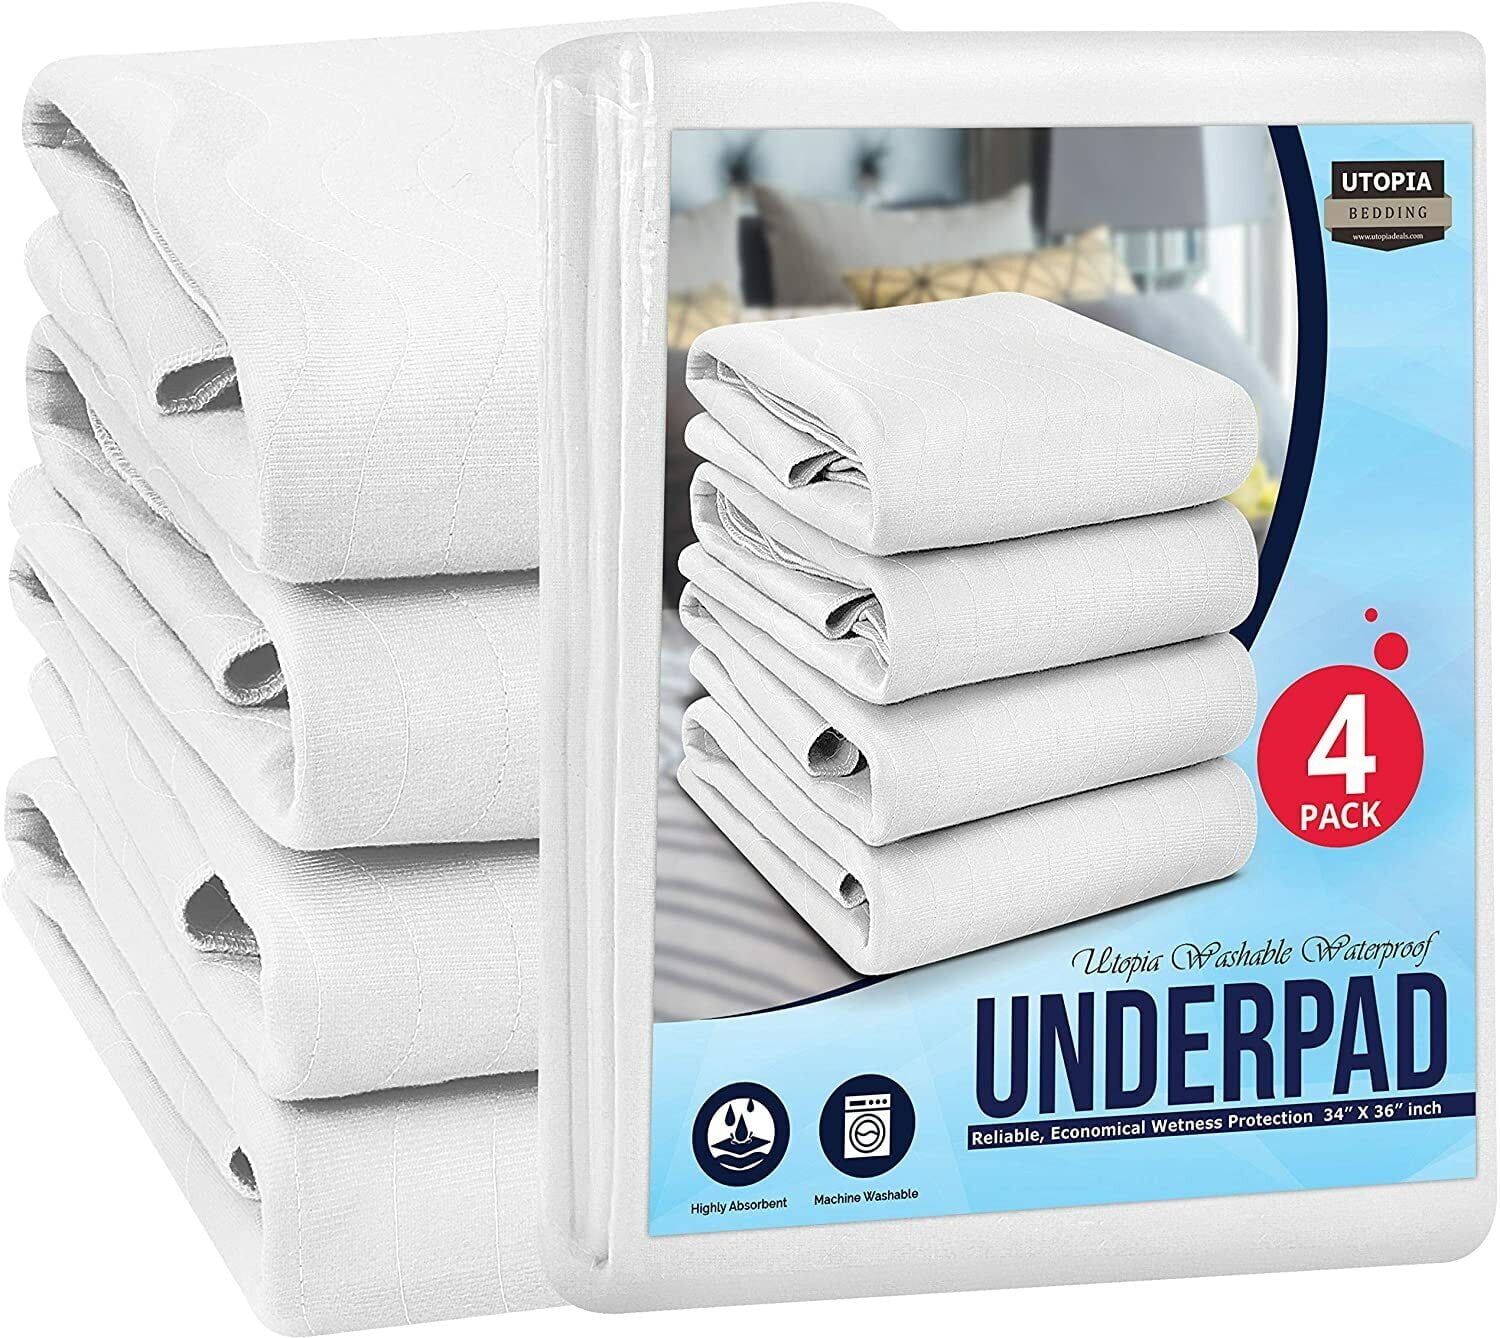 4 Pack Utopia Bedding Underpads Quilted Waterproof Incontinence Pads 